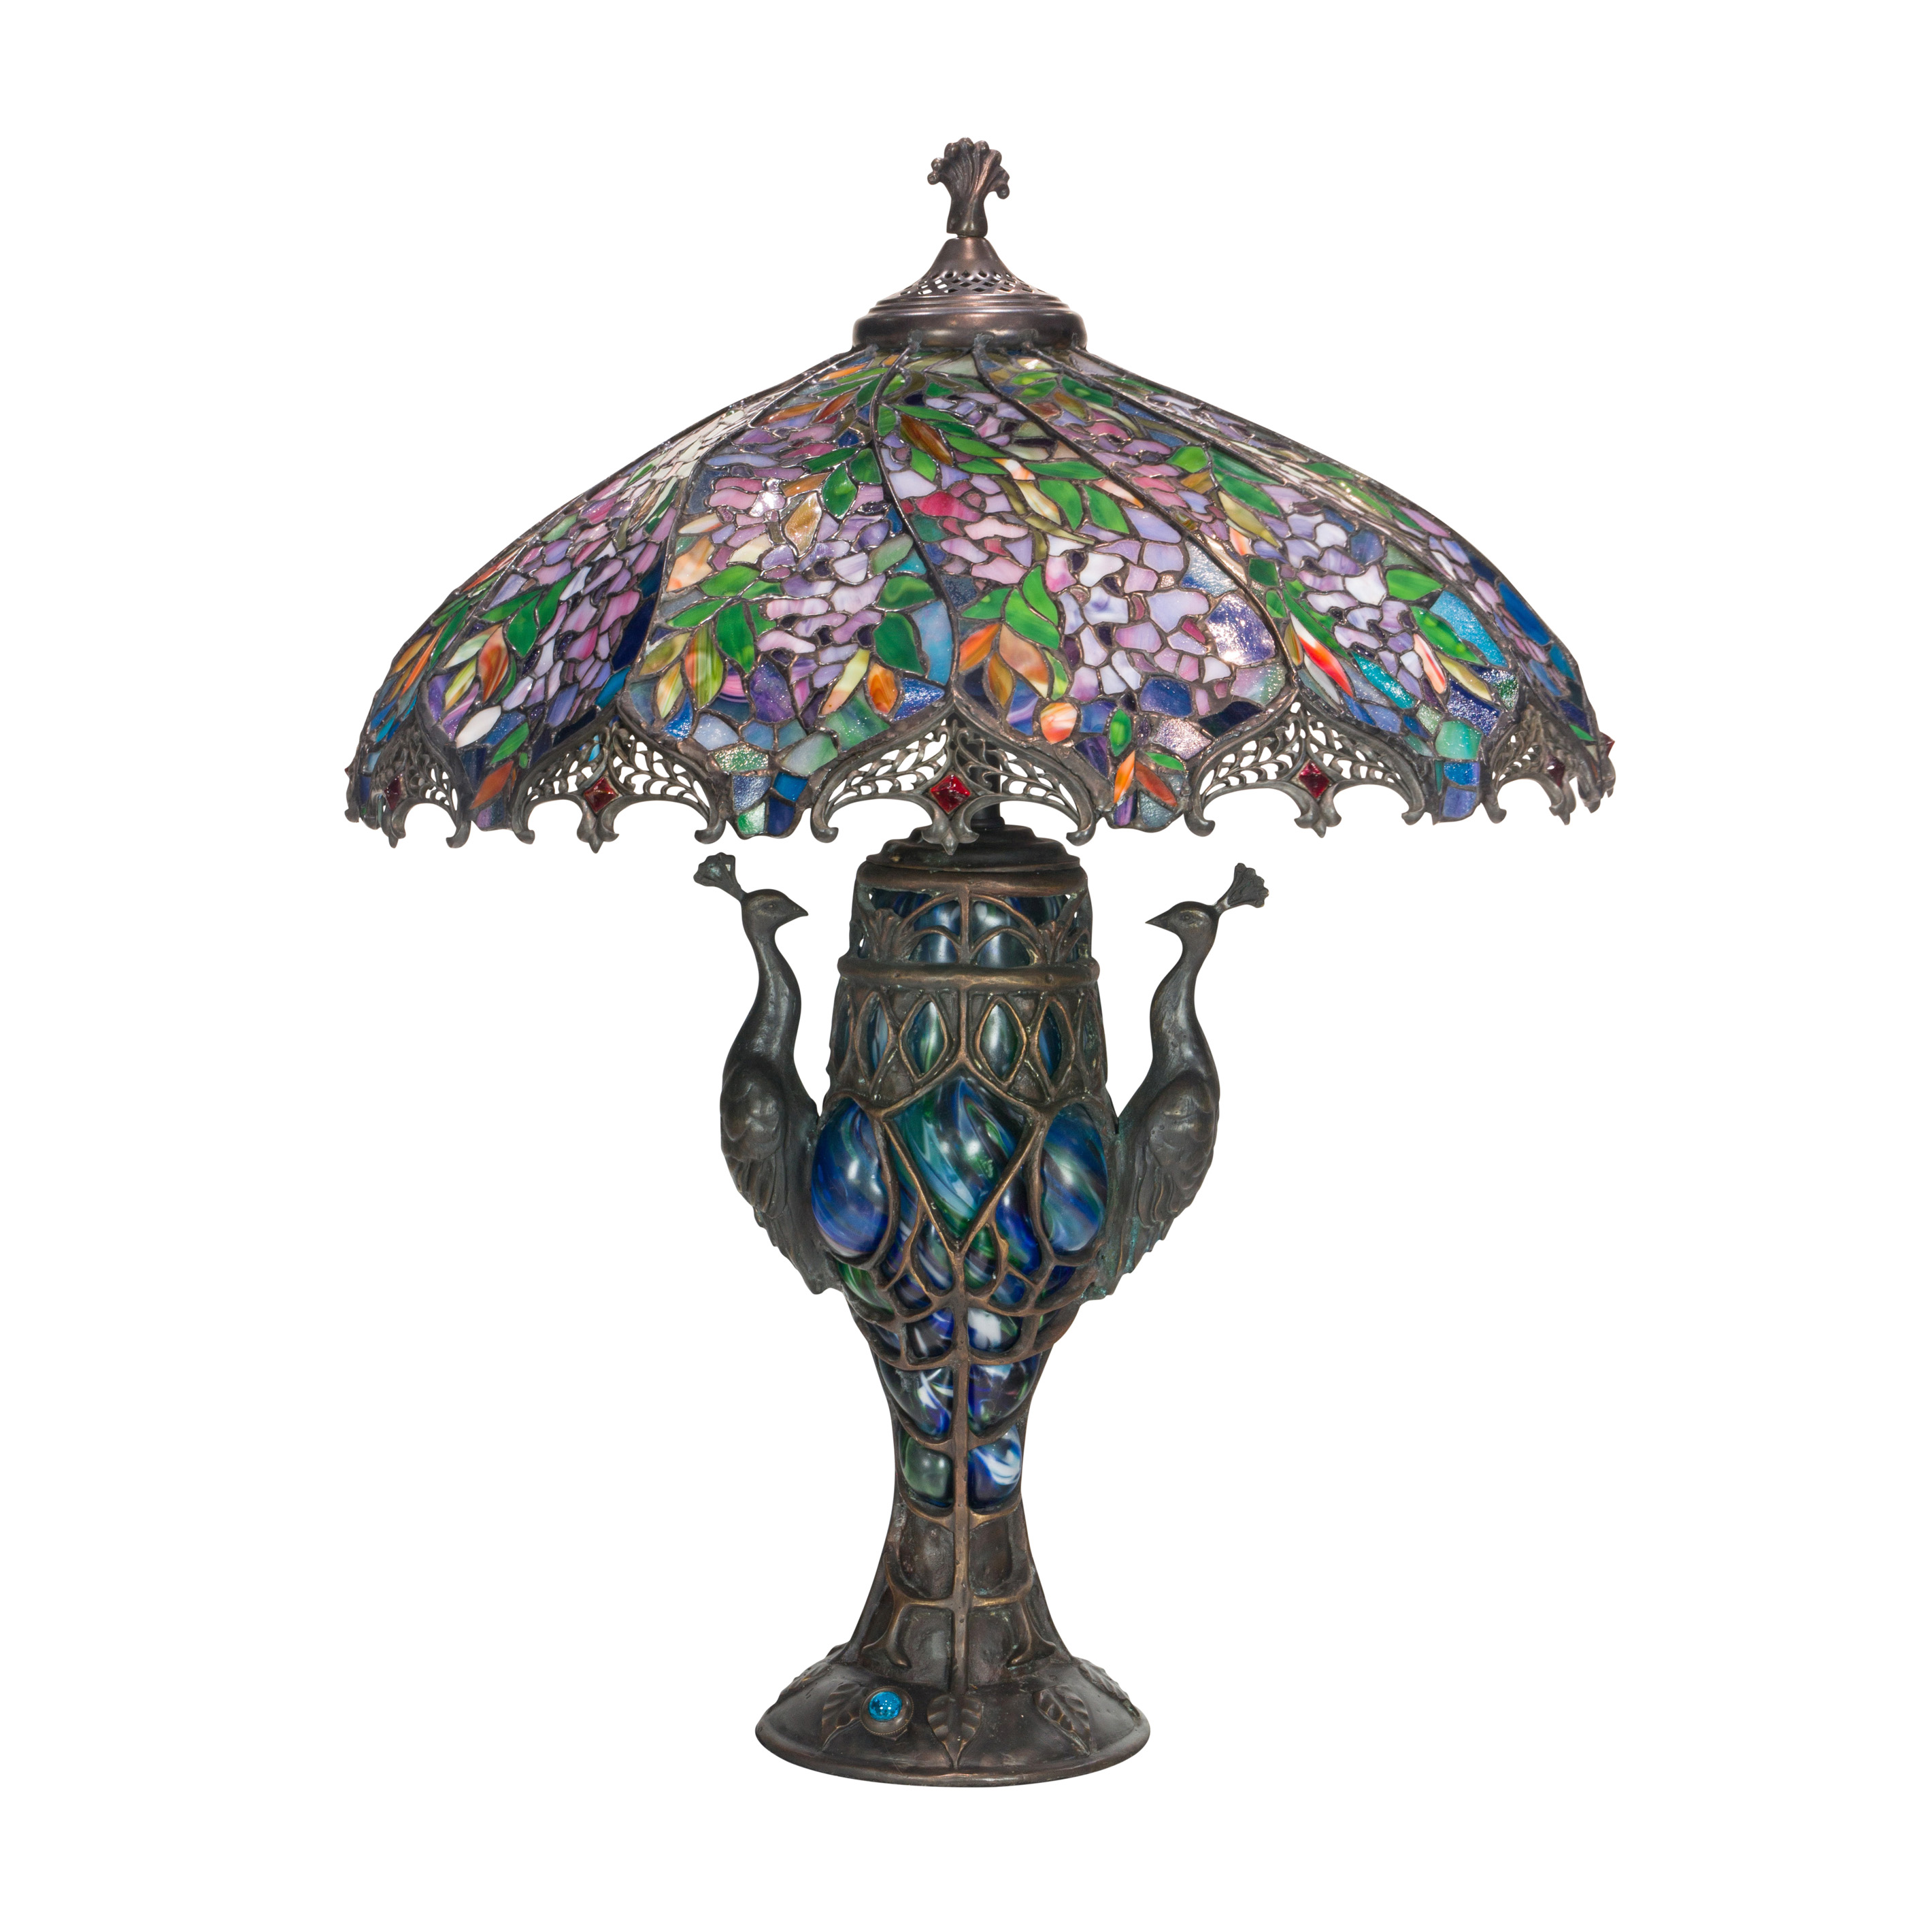 A TIFFANY STYLE LAMP LEADED GLASS 2d1bf6